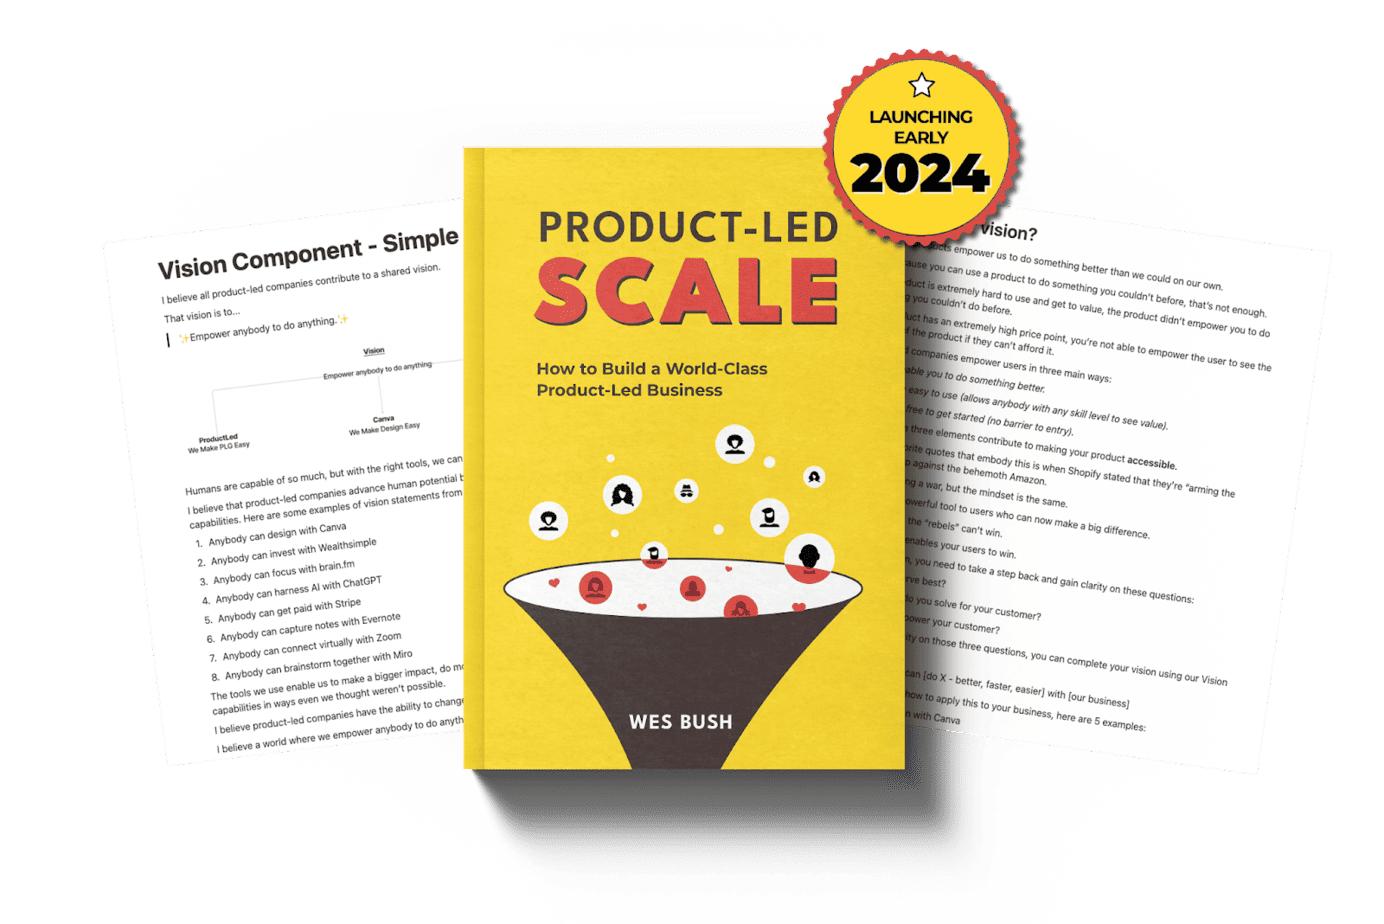 ProductLed Scale 2024